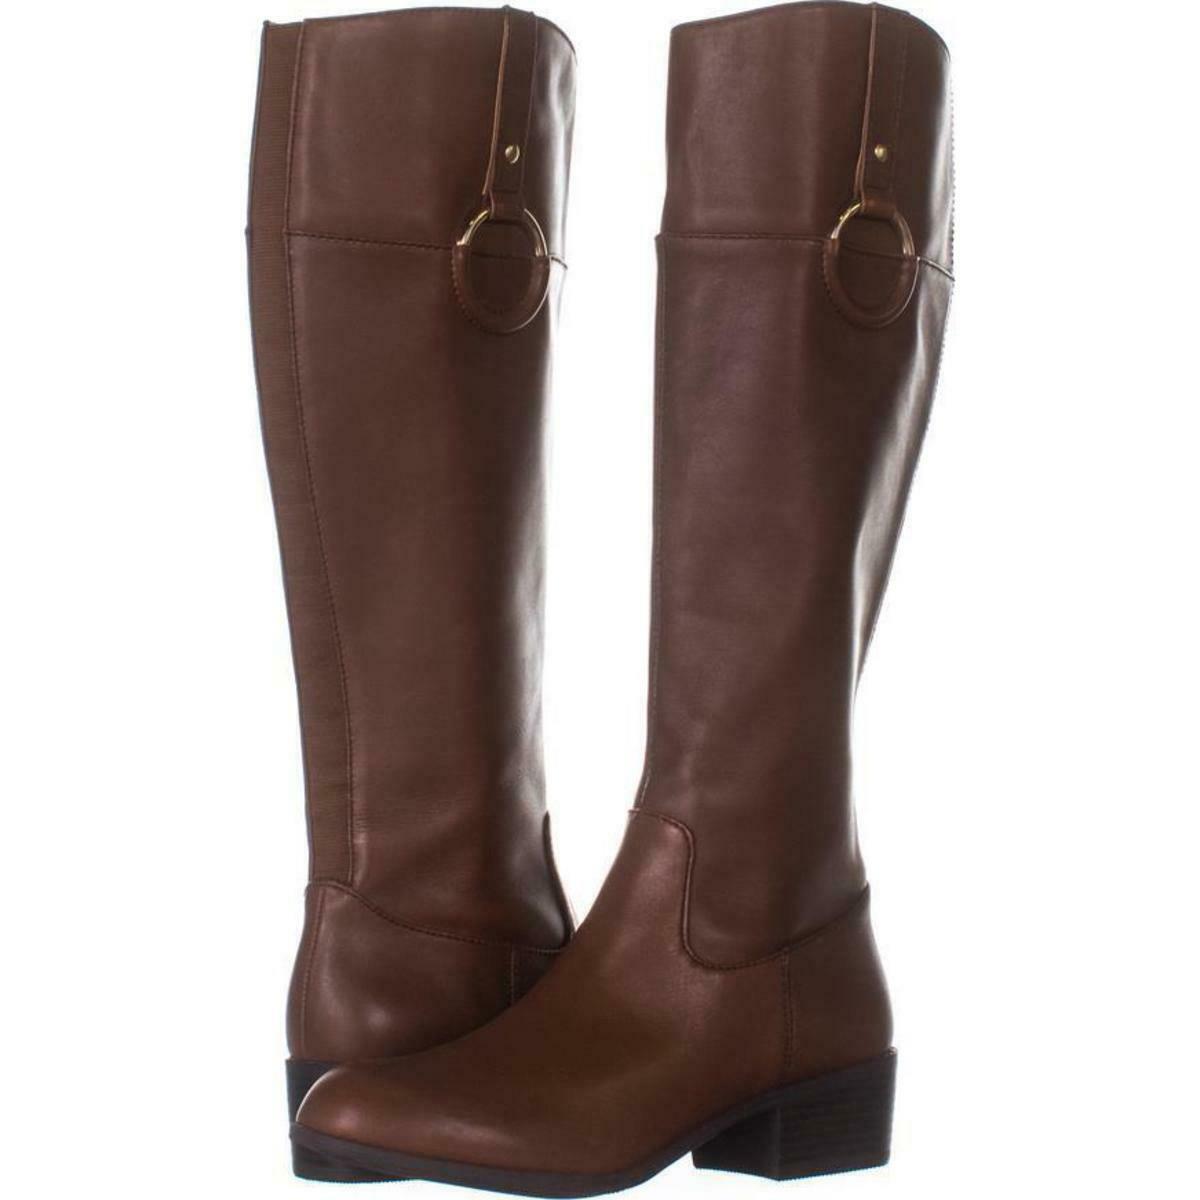 A35 Briaah Under the Knee Side Zip Up Boots 364, Cognac, 8 US - Boots